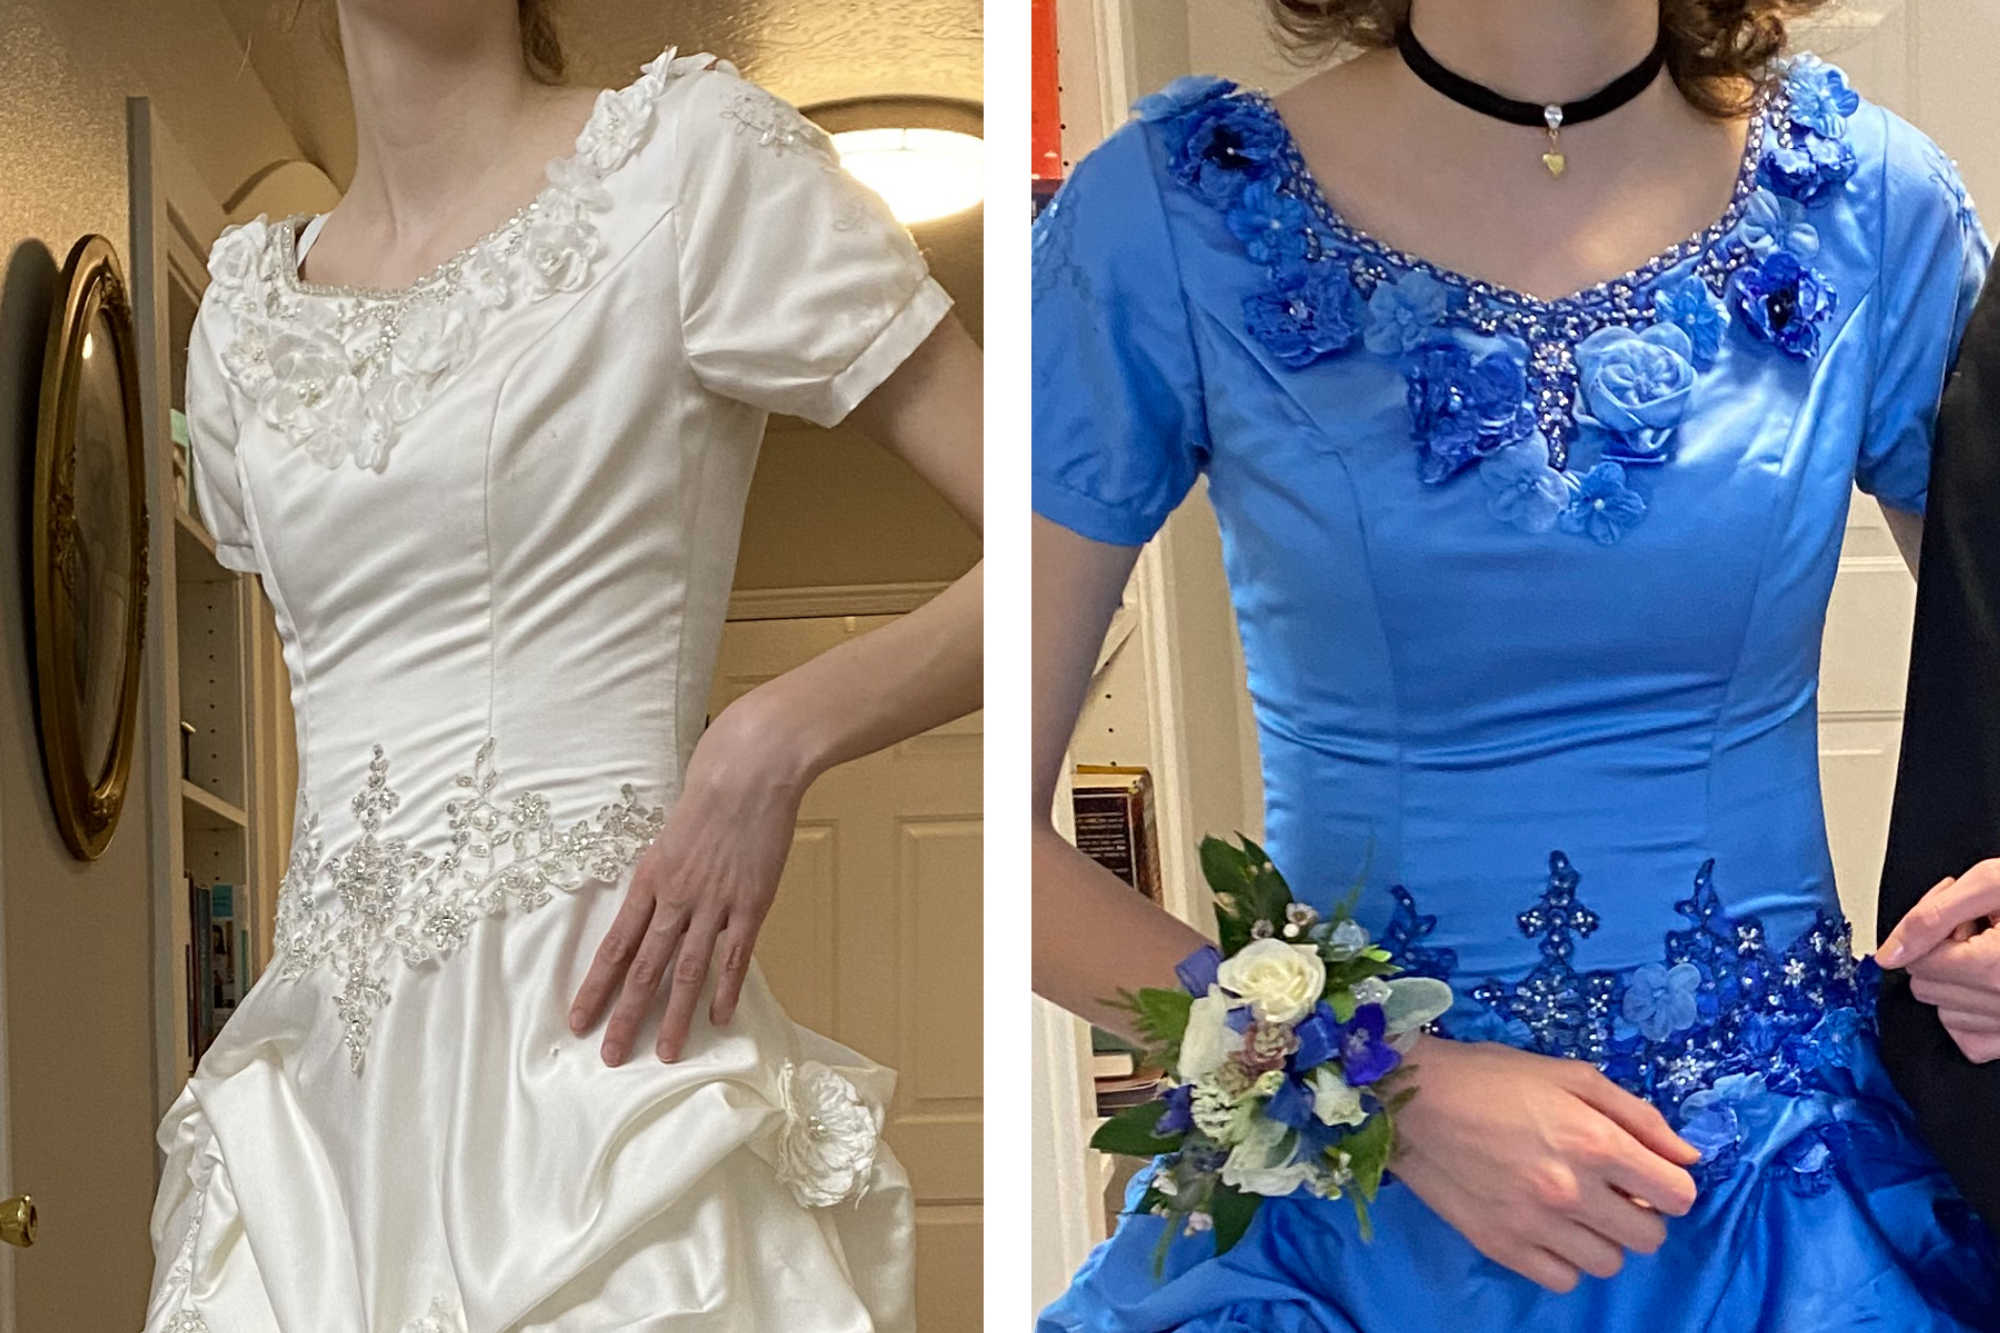 On the left, a secondhand wedding dress from DI. On the right, the same dress dyed blue.